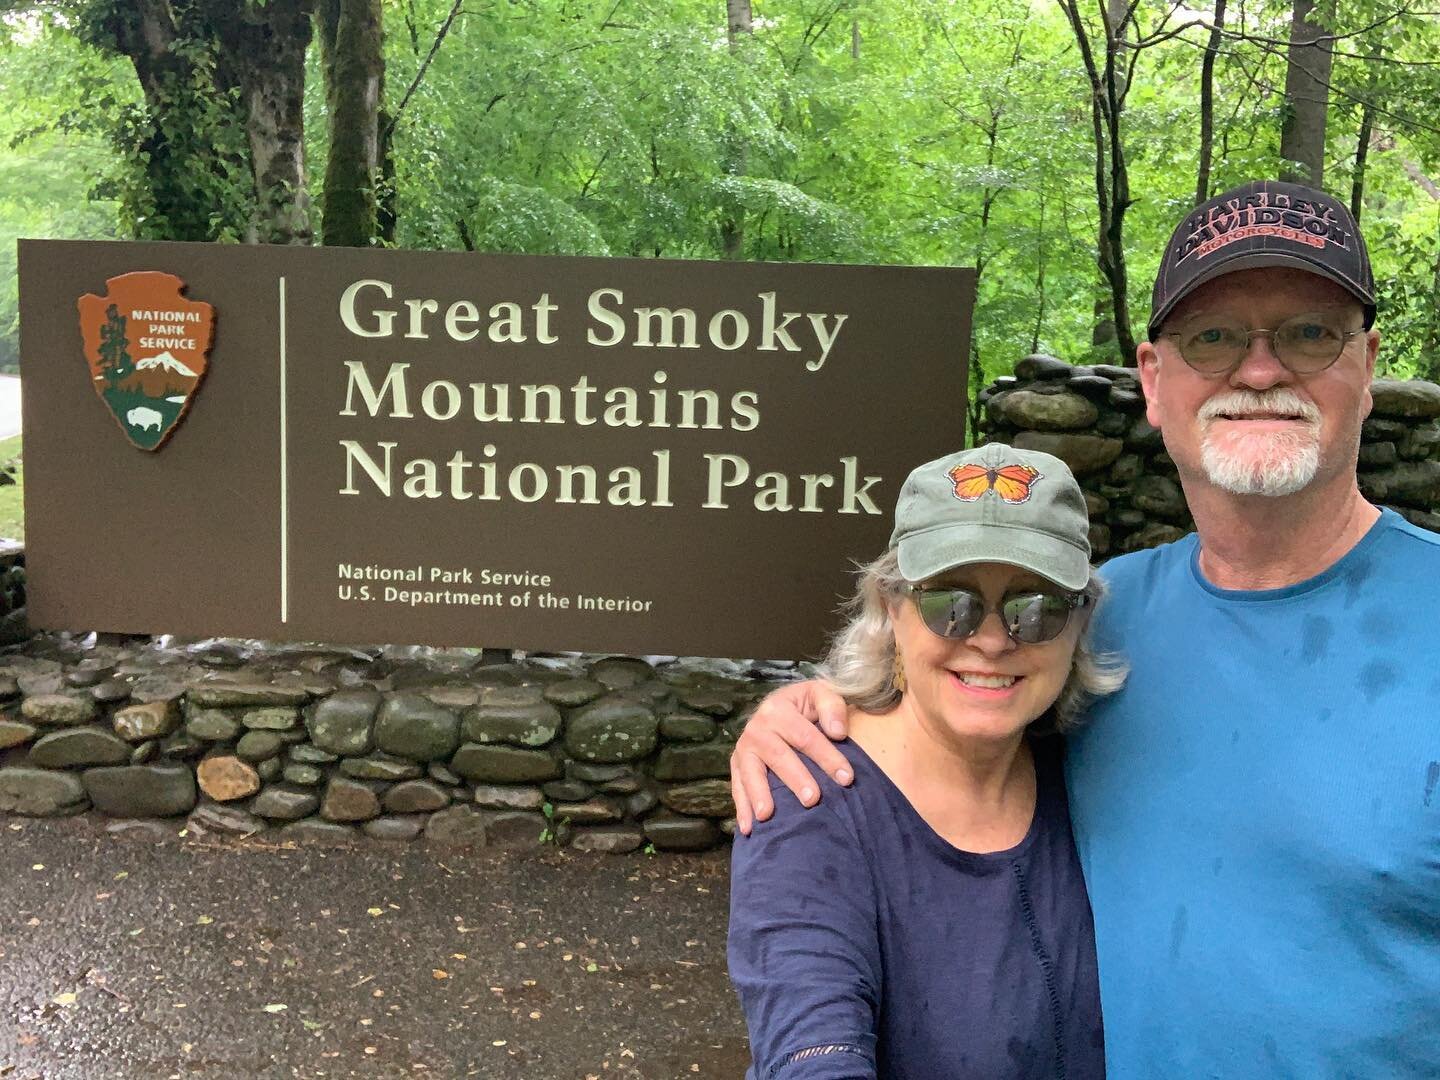 Hangin&rsquo; out here in these green smoky mountains with the wildlife is such a treat!

The black bear on the roadside.

The turkeys in the grass &amp; thickets.

The deer in the meadows.

The bear cub in the trees beside our trail.

The salamander